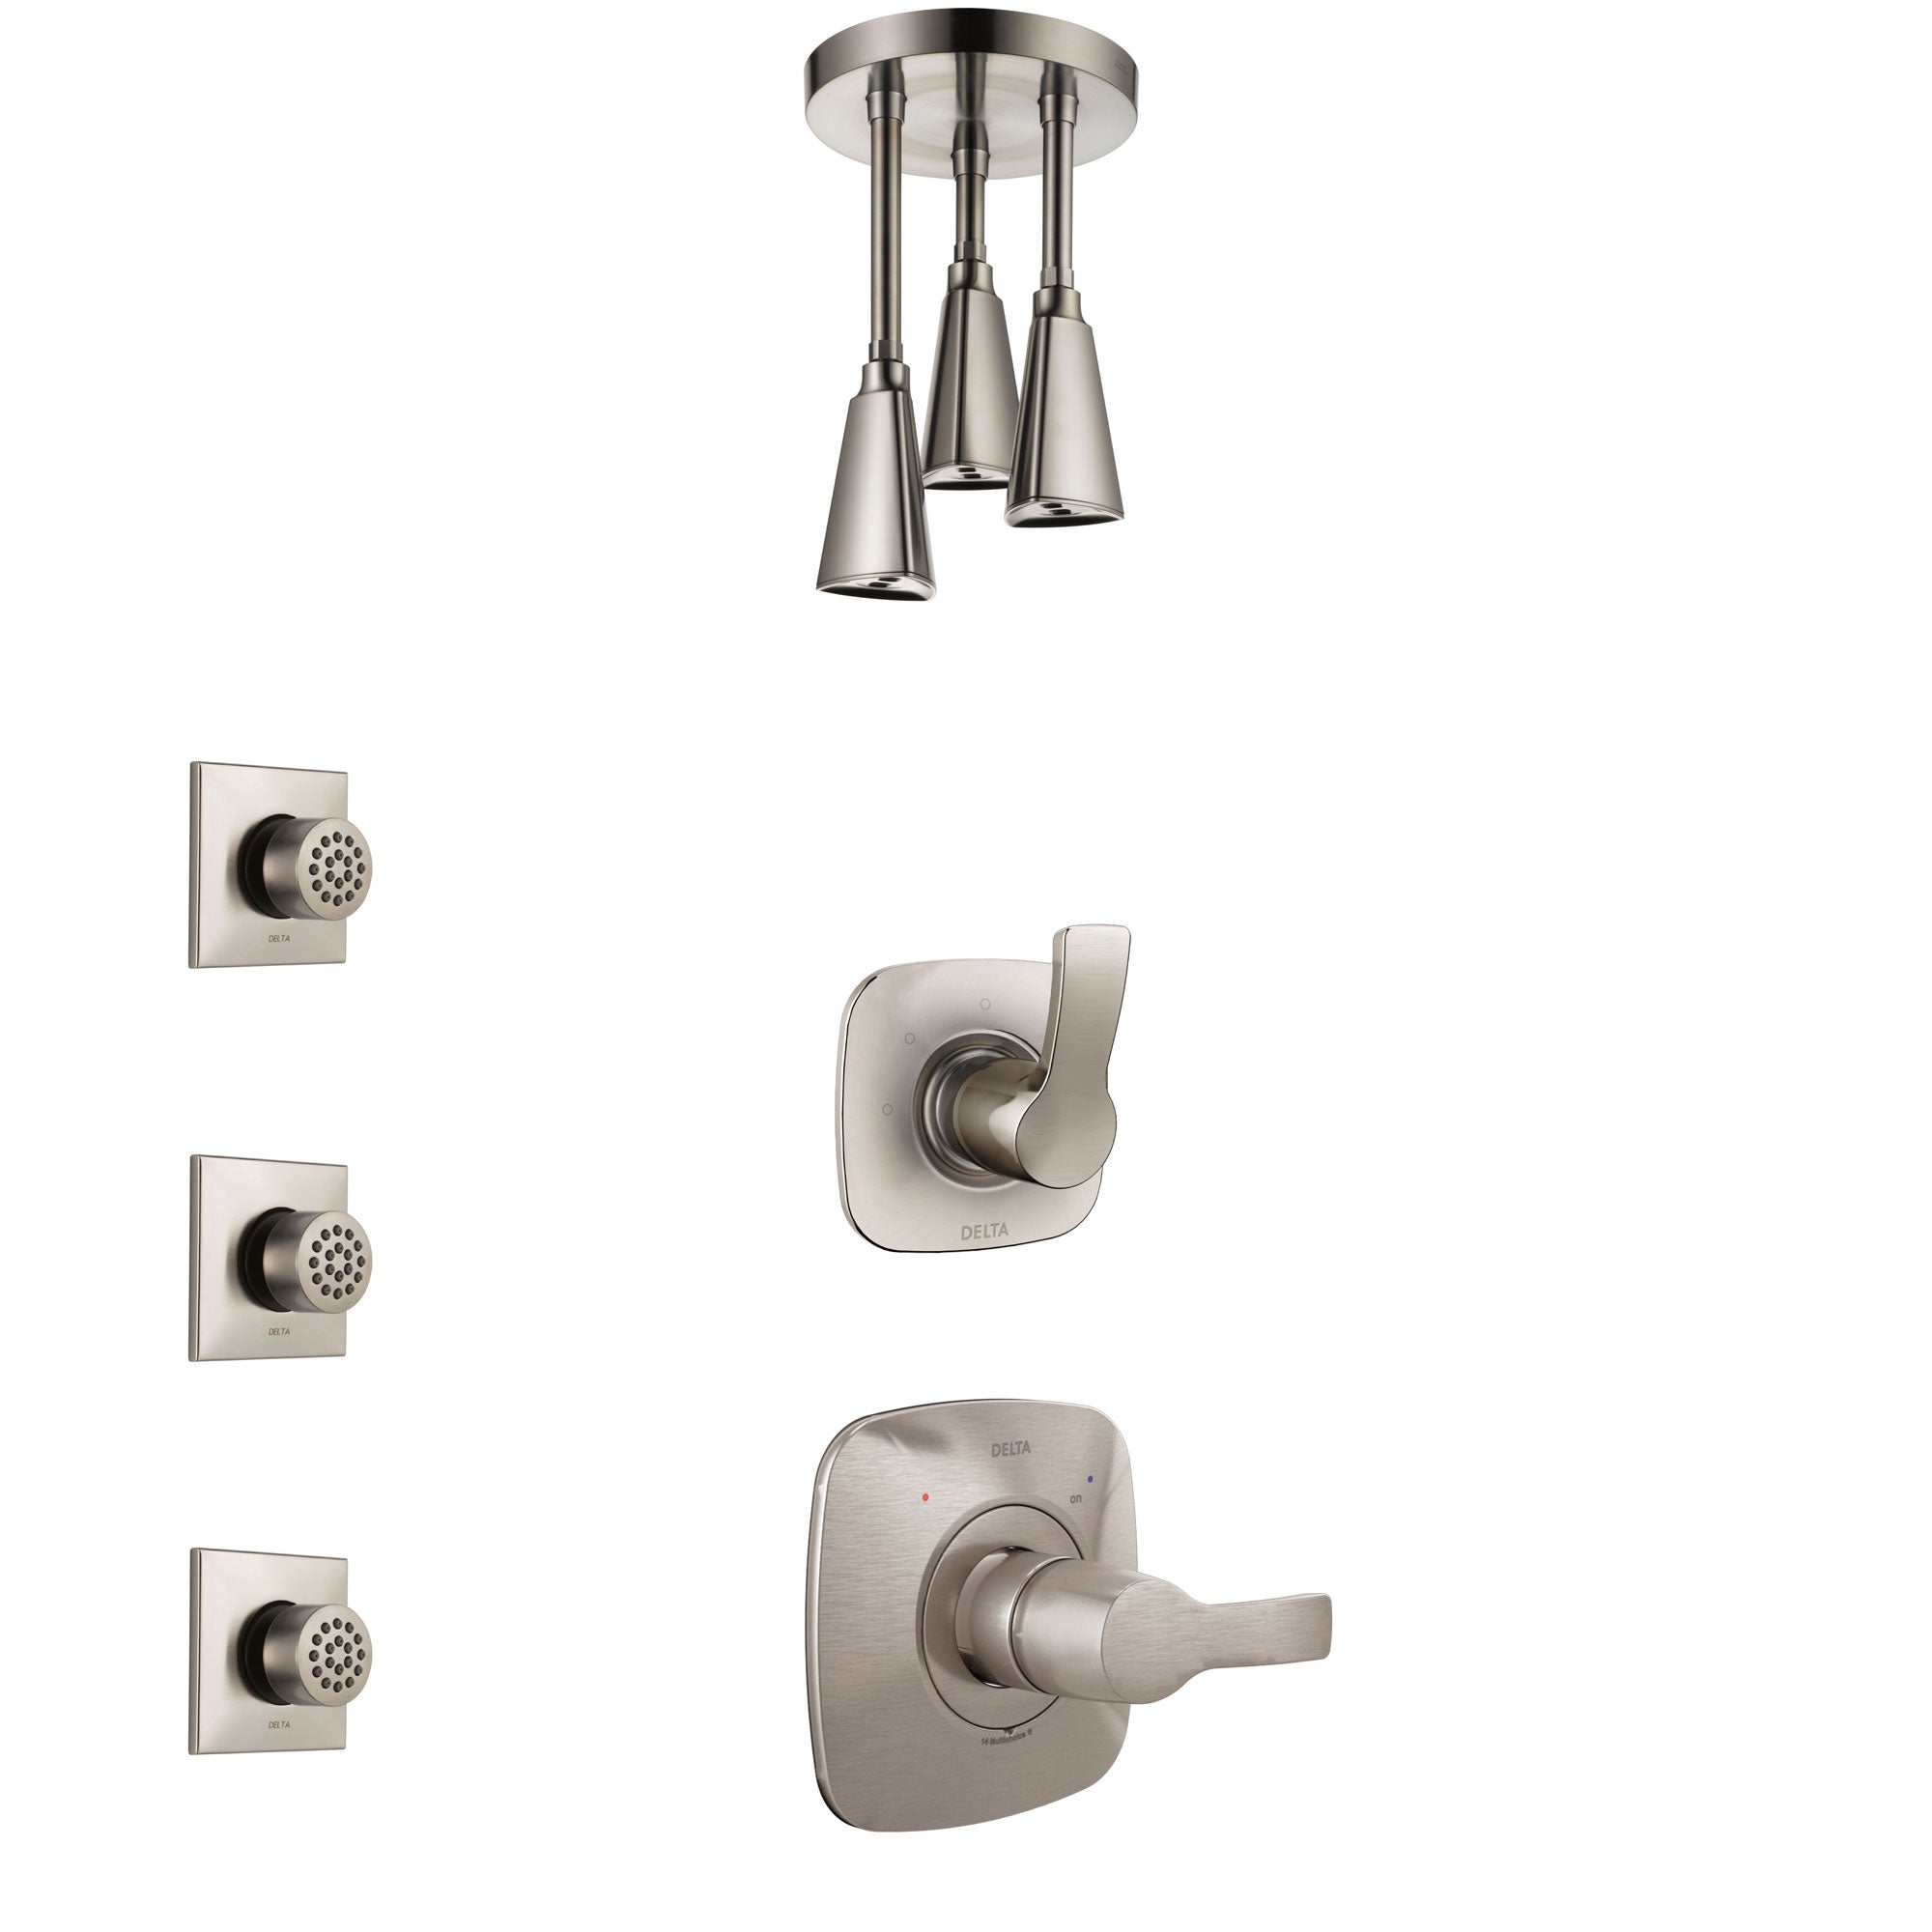 Delta Tesla Stainless Steel Finish Shower System with Control Handle, 3-Setting Diverter, Ceiling Mount Showerhead, and 3 Body Sprays SS1452SS8